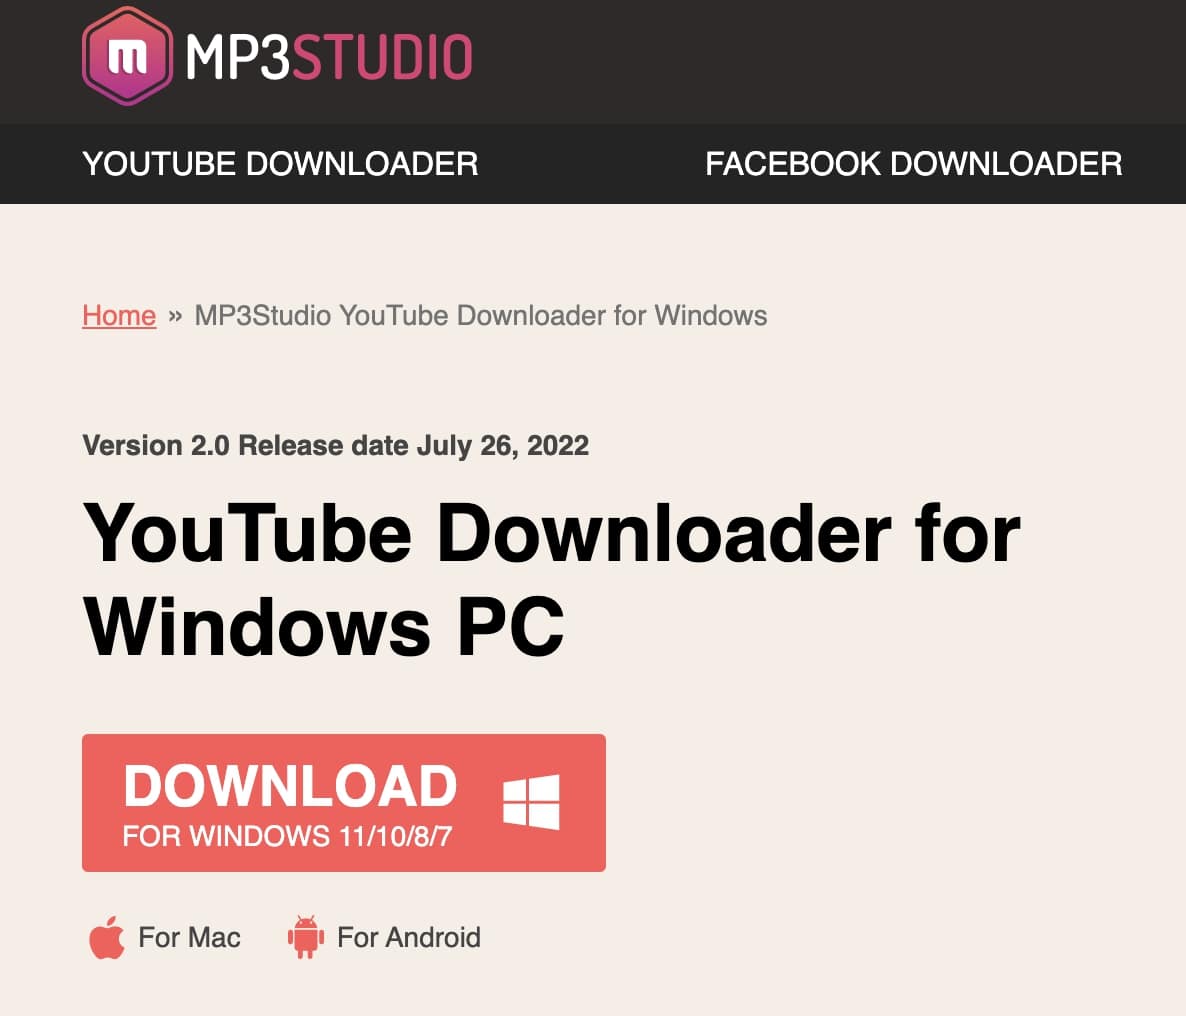  Download-YouTube-Music-Playlist-MP3Studio-YouTube-Downloader  